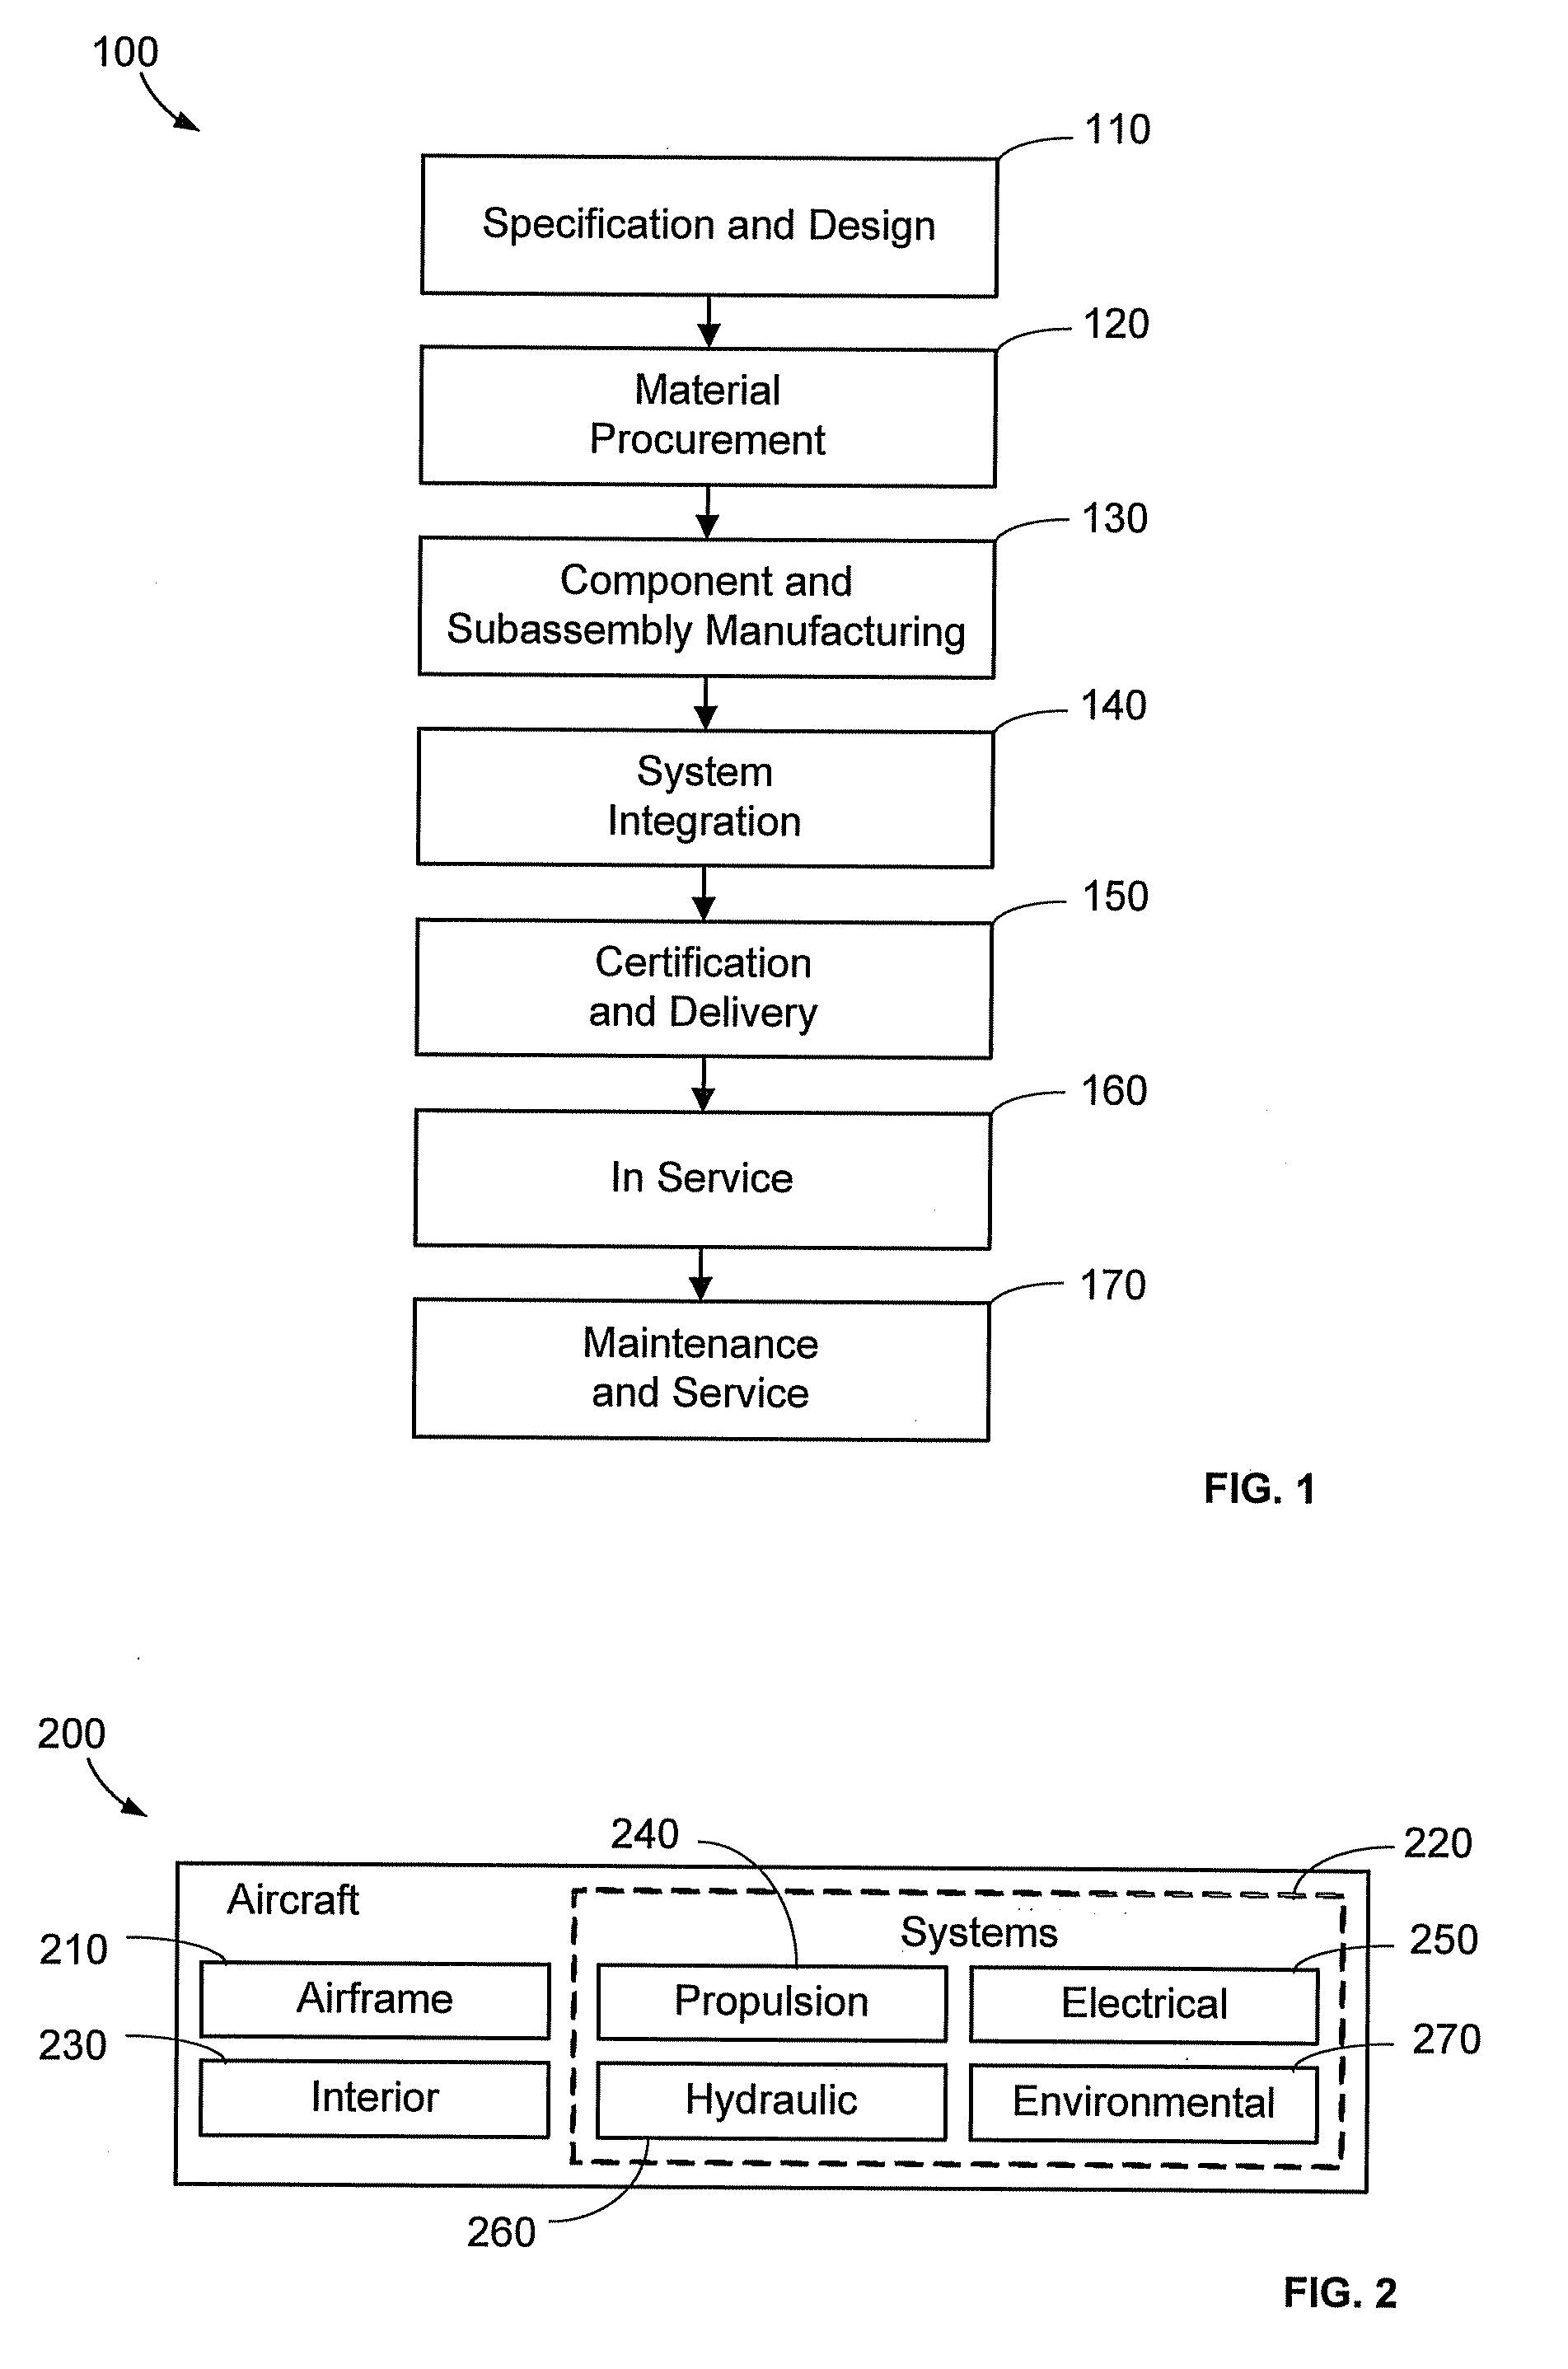 Distributing Power in Systems Having a Composite Structure